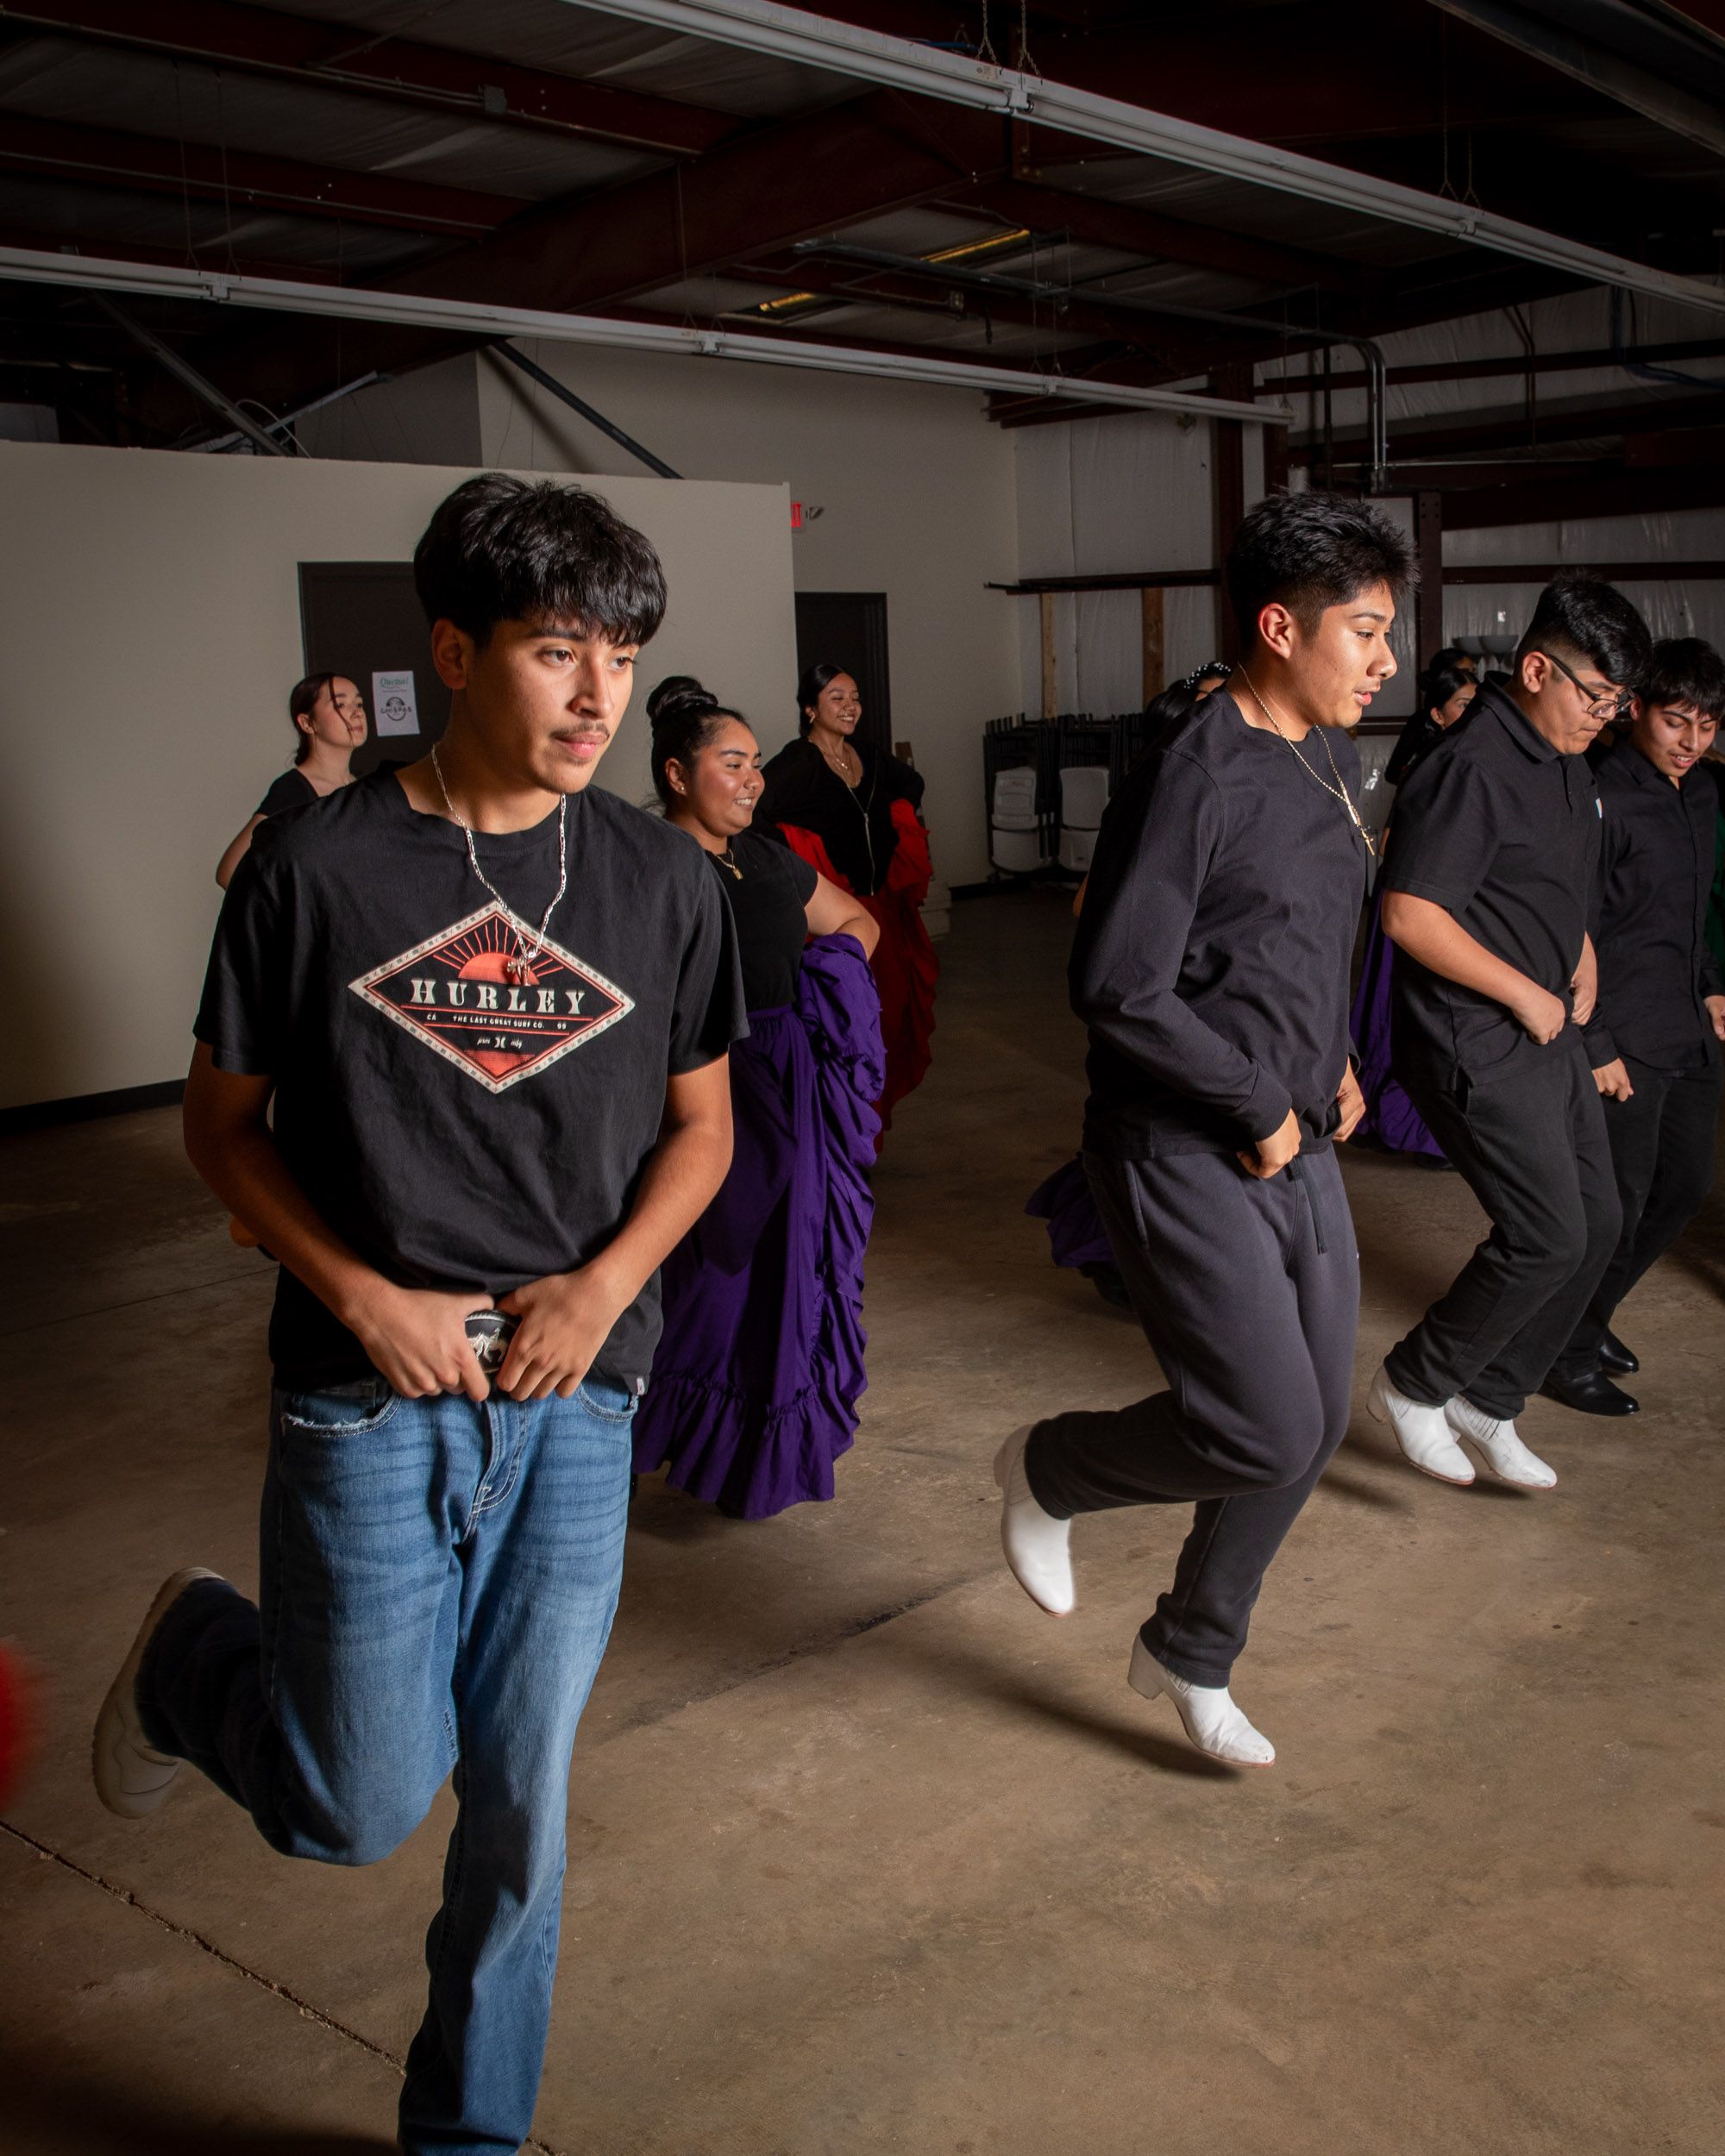 In a rehearsal space, there are young boys in casual clothes dancing in a row and holding their belt buckles.